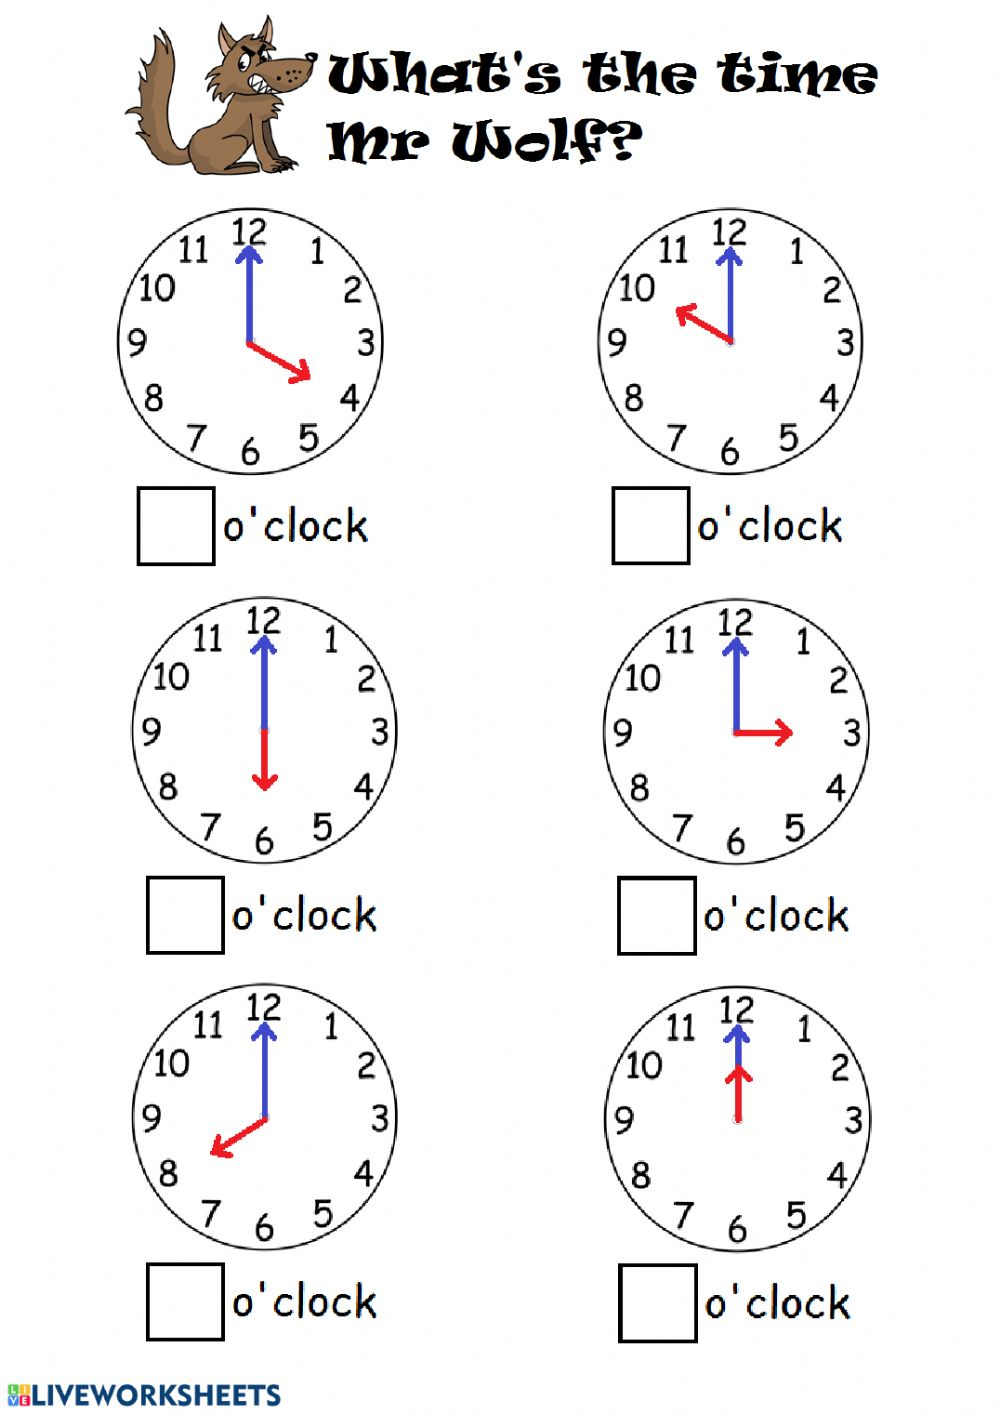 Worksheet Telling Time By The Hour